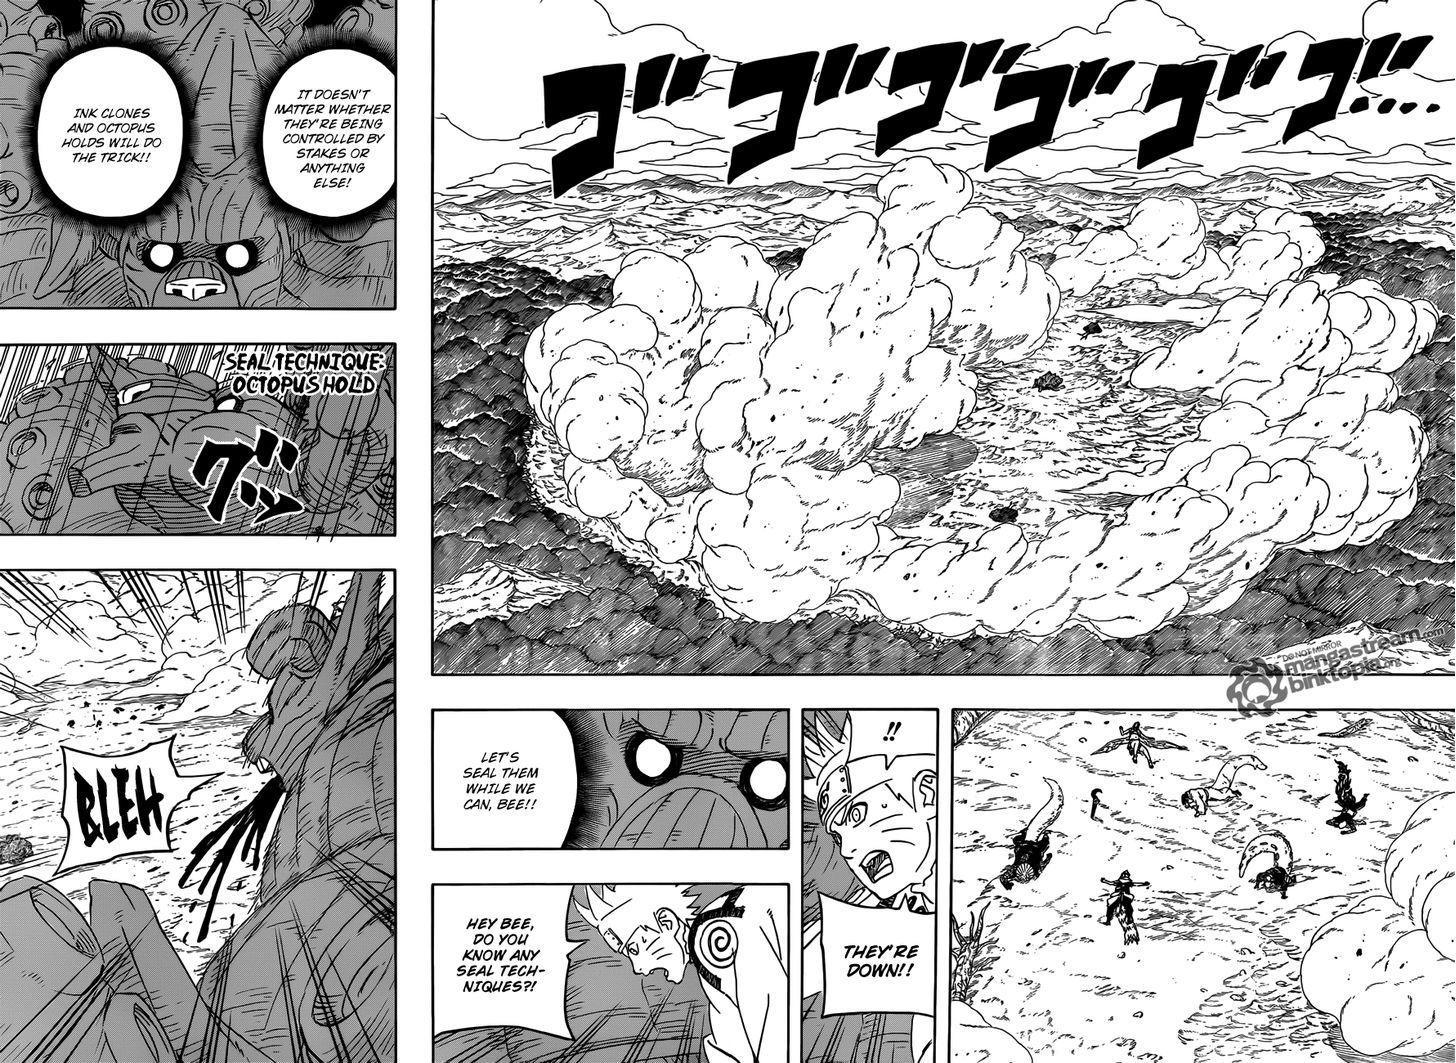 Vol.60 Chapter 566 – Eyes and Beasts | 5 page